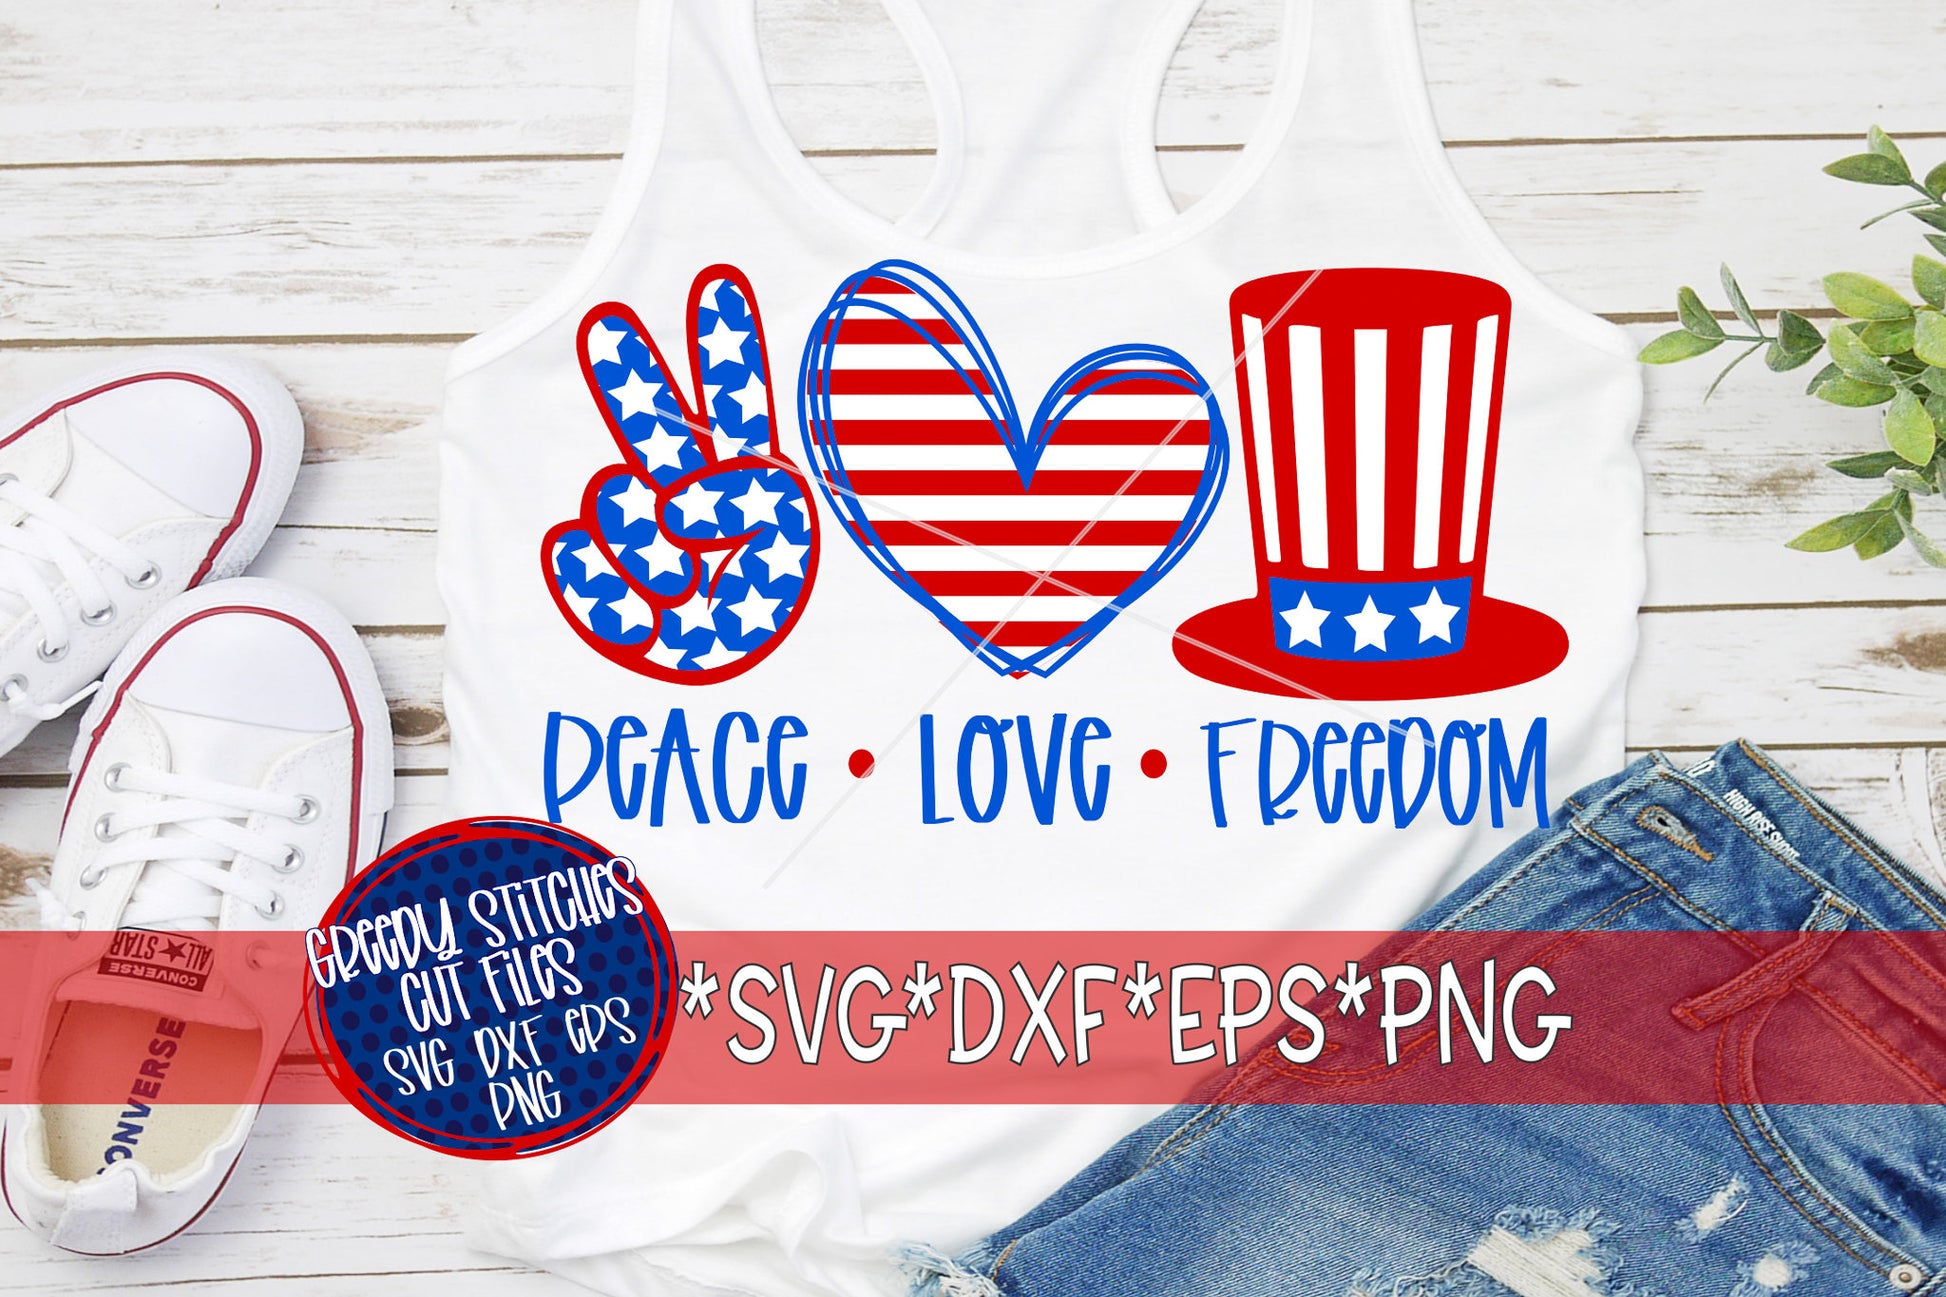 Peace Love Freedom svg, eps, dxf, png. July 4th SvG | independence Day DxF | Fourth of July SvG  | Freedom SvG | Instant Download Cut Files